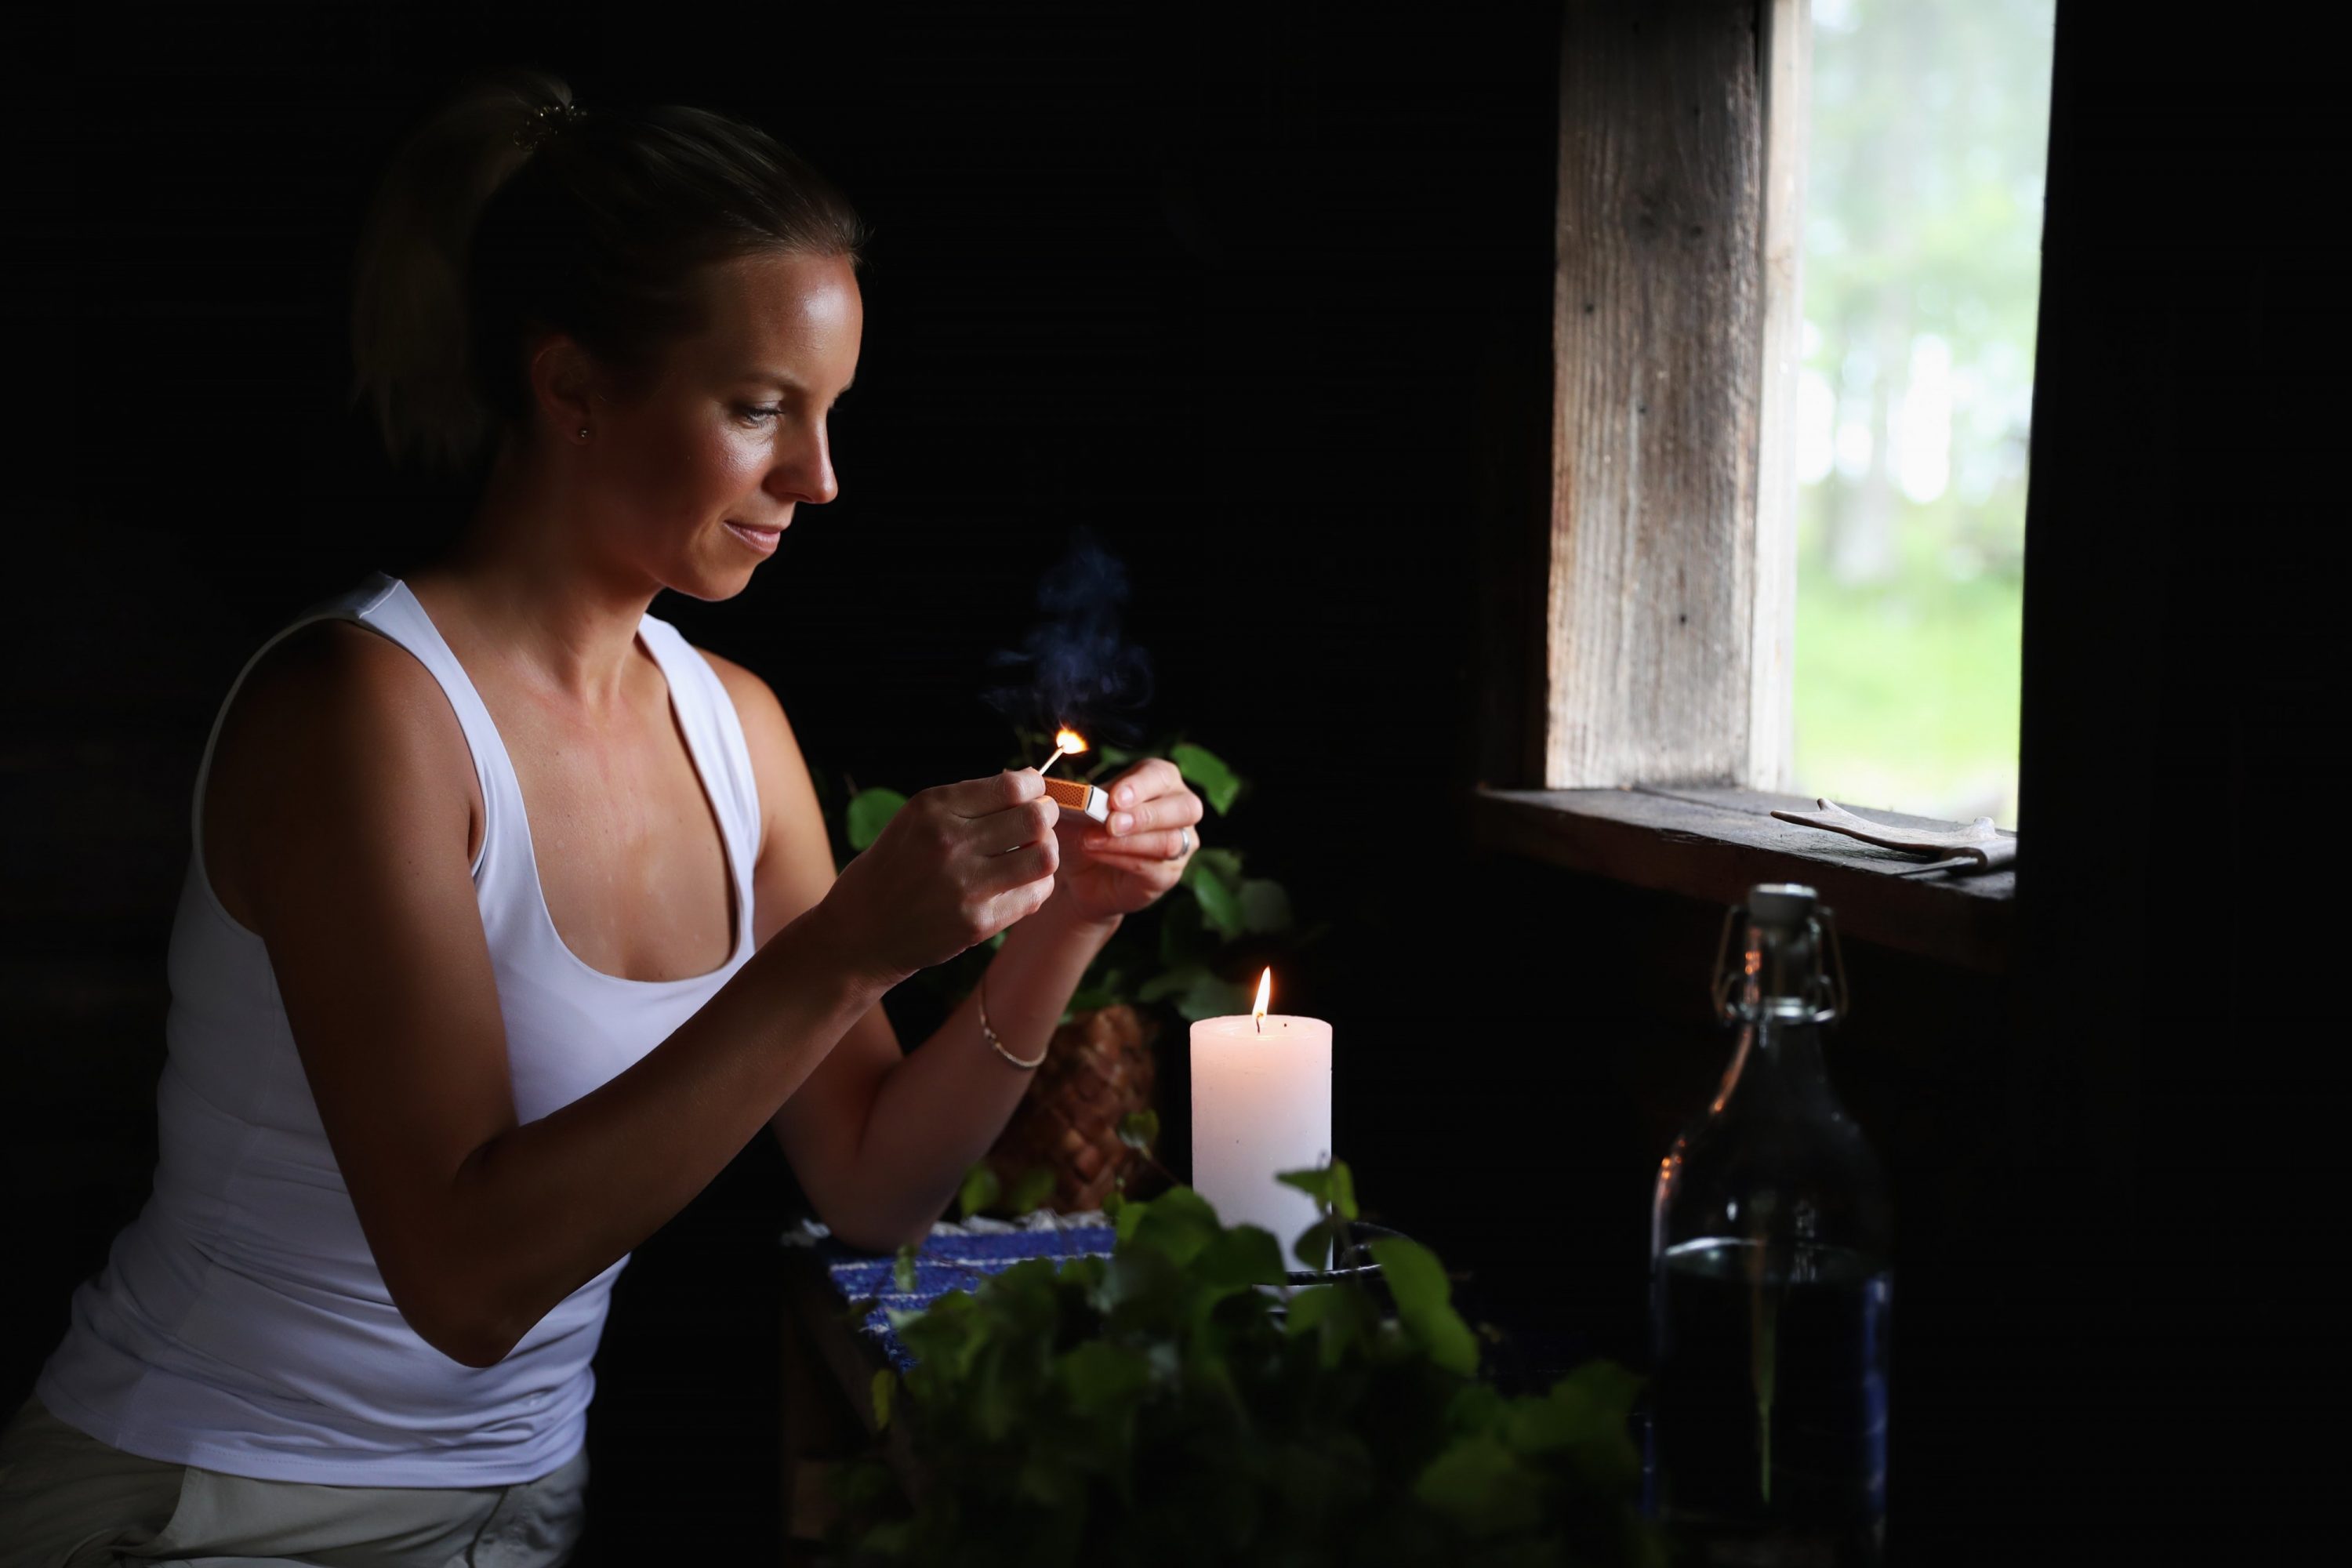 A woman lighting a candle